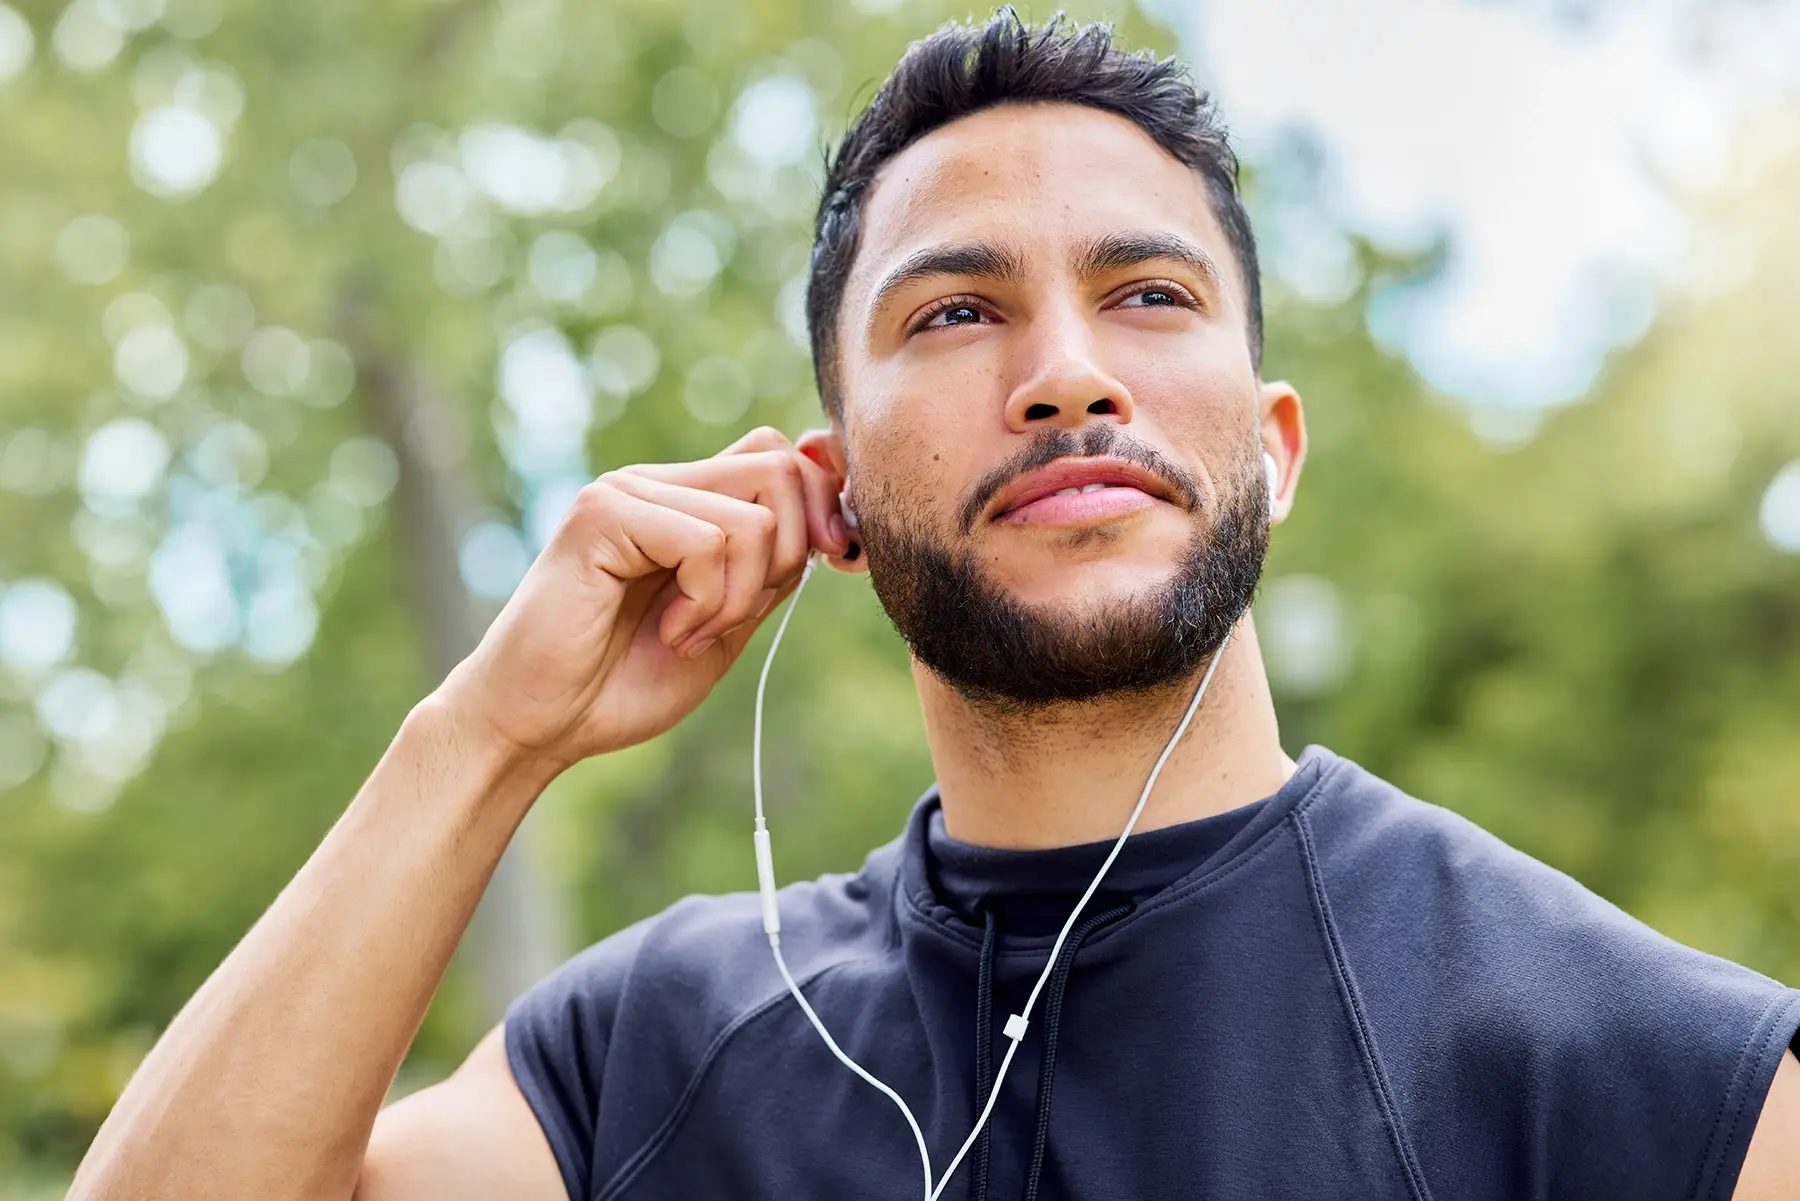 A man listening to music in a park.